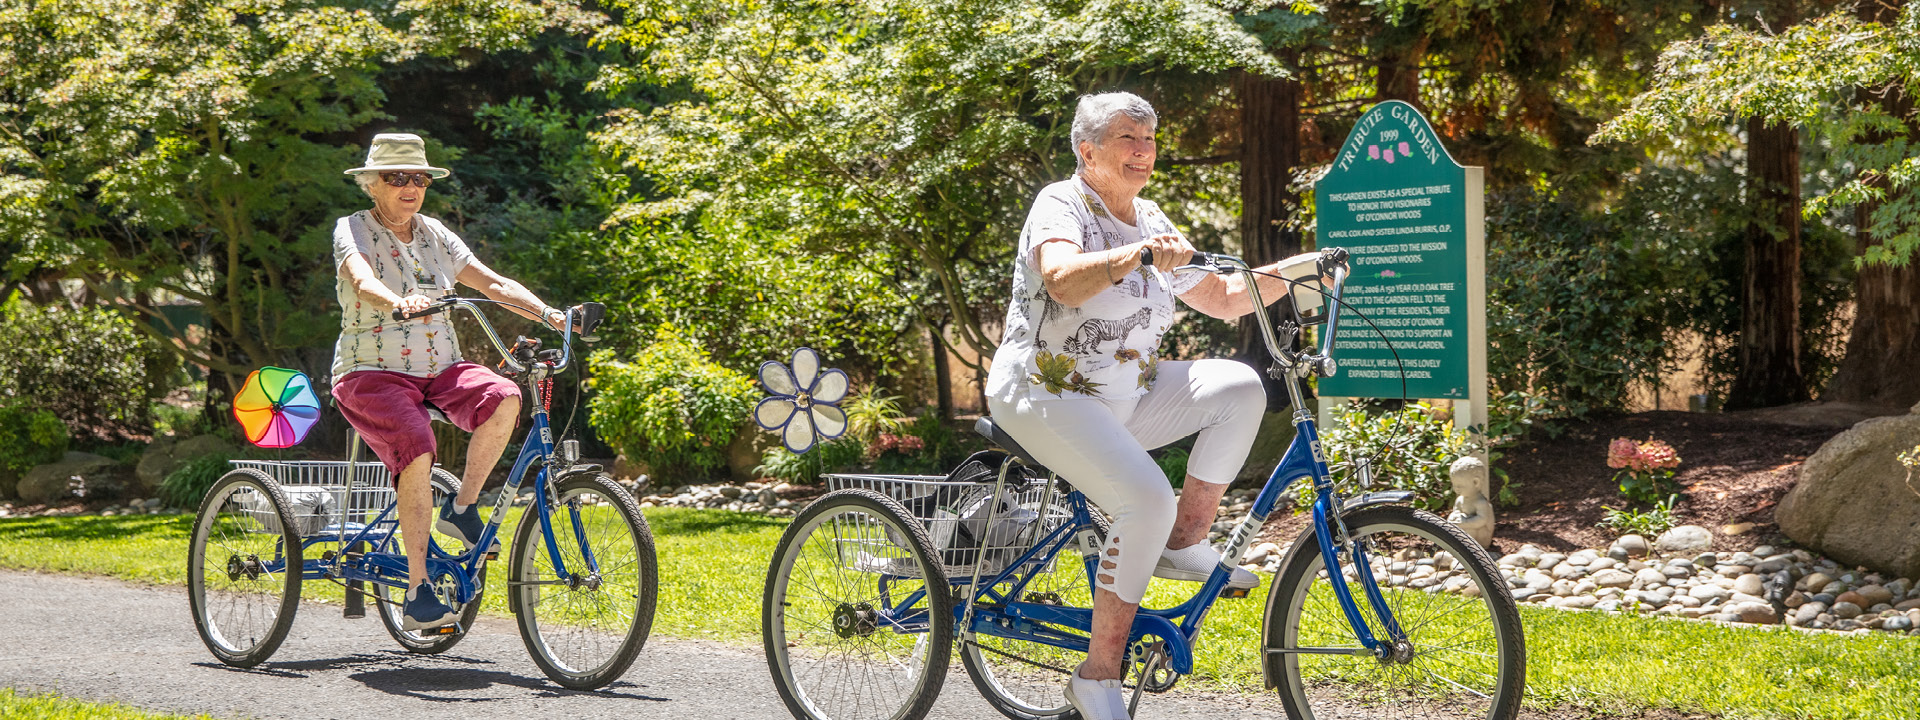 Residents riding on a bike